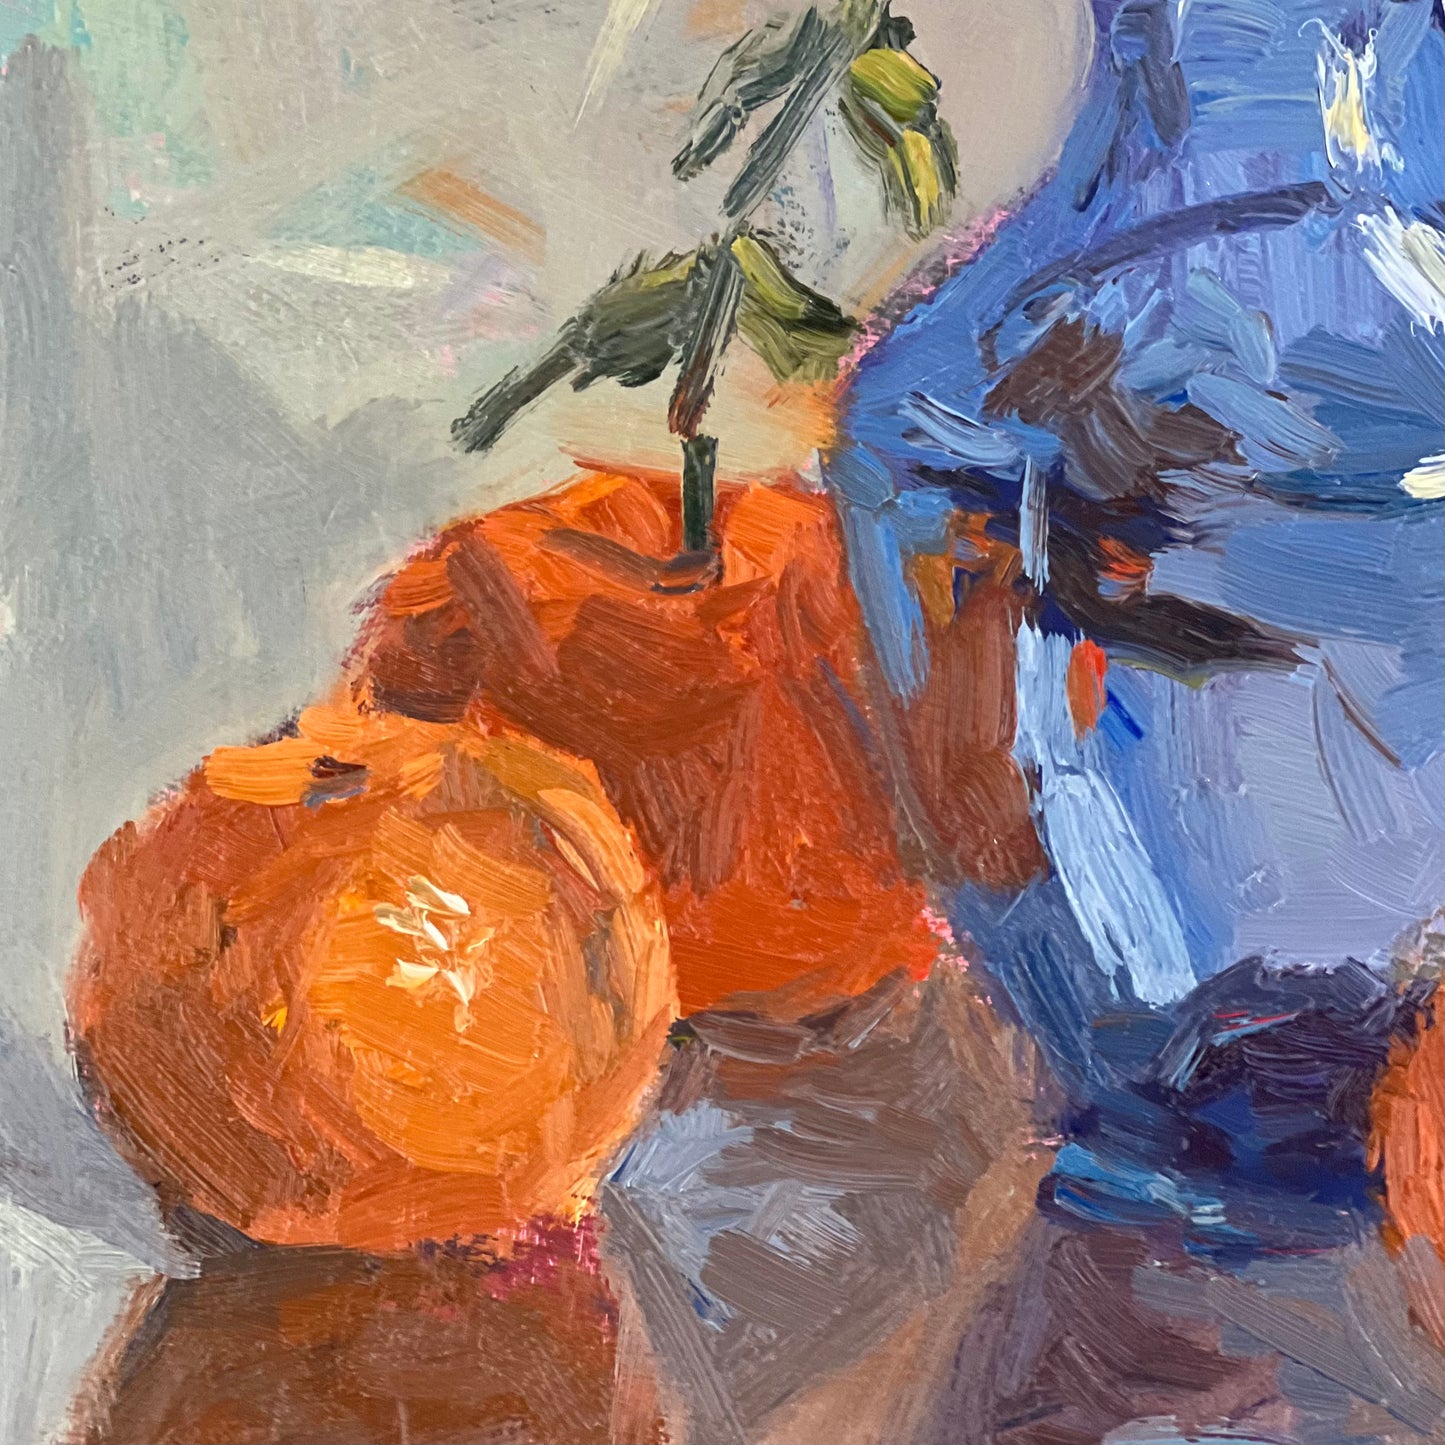 Mandarines with a blue glass! - Still Life Oil Painting